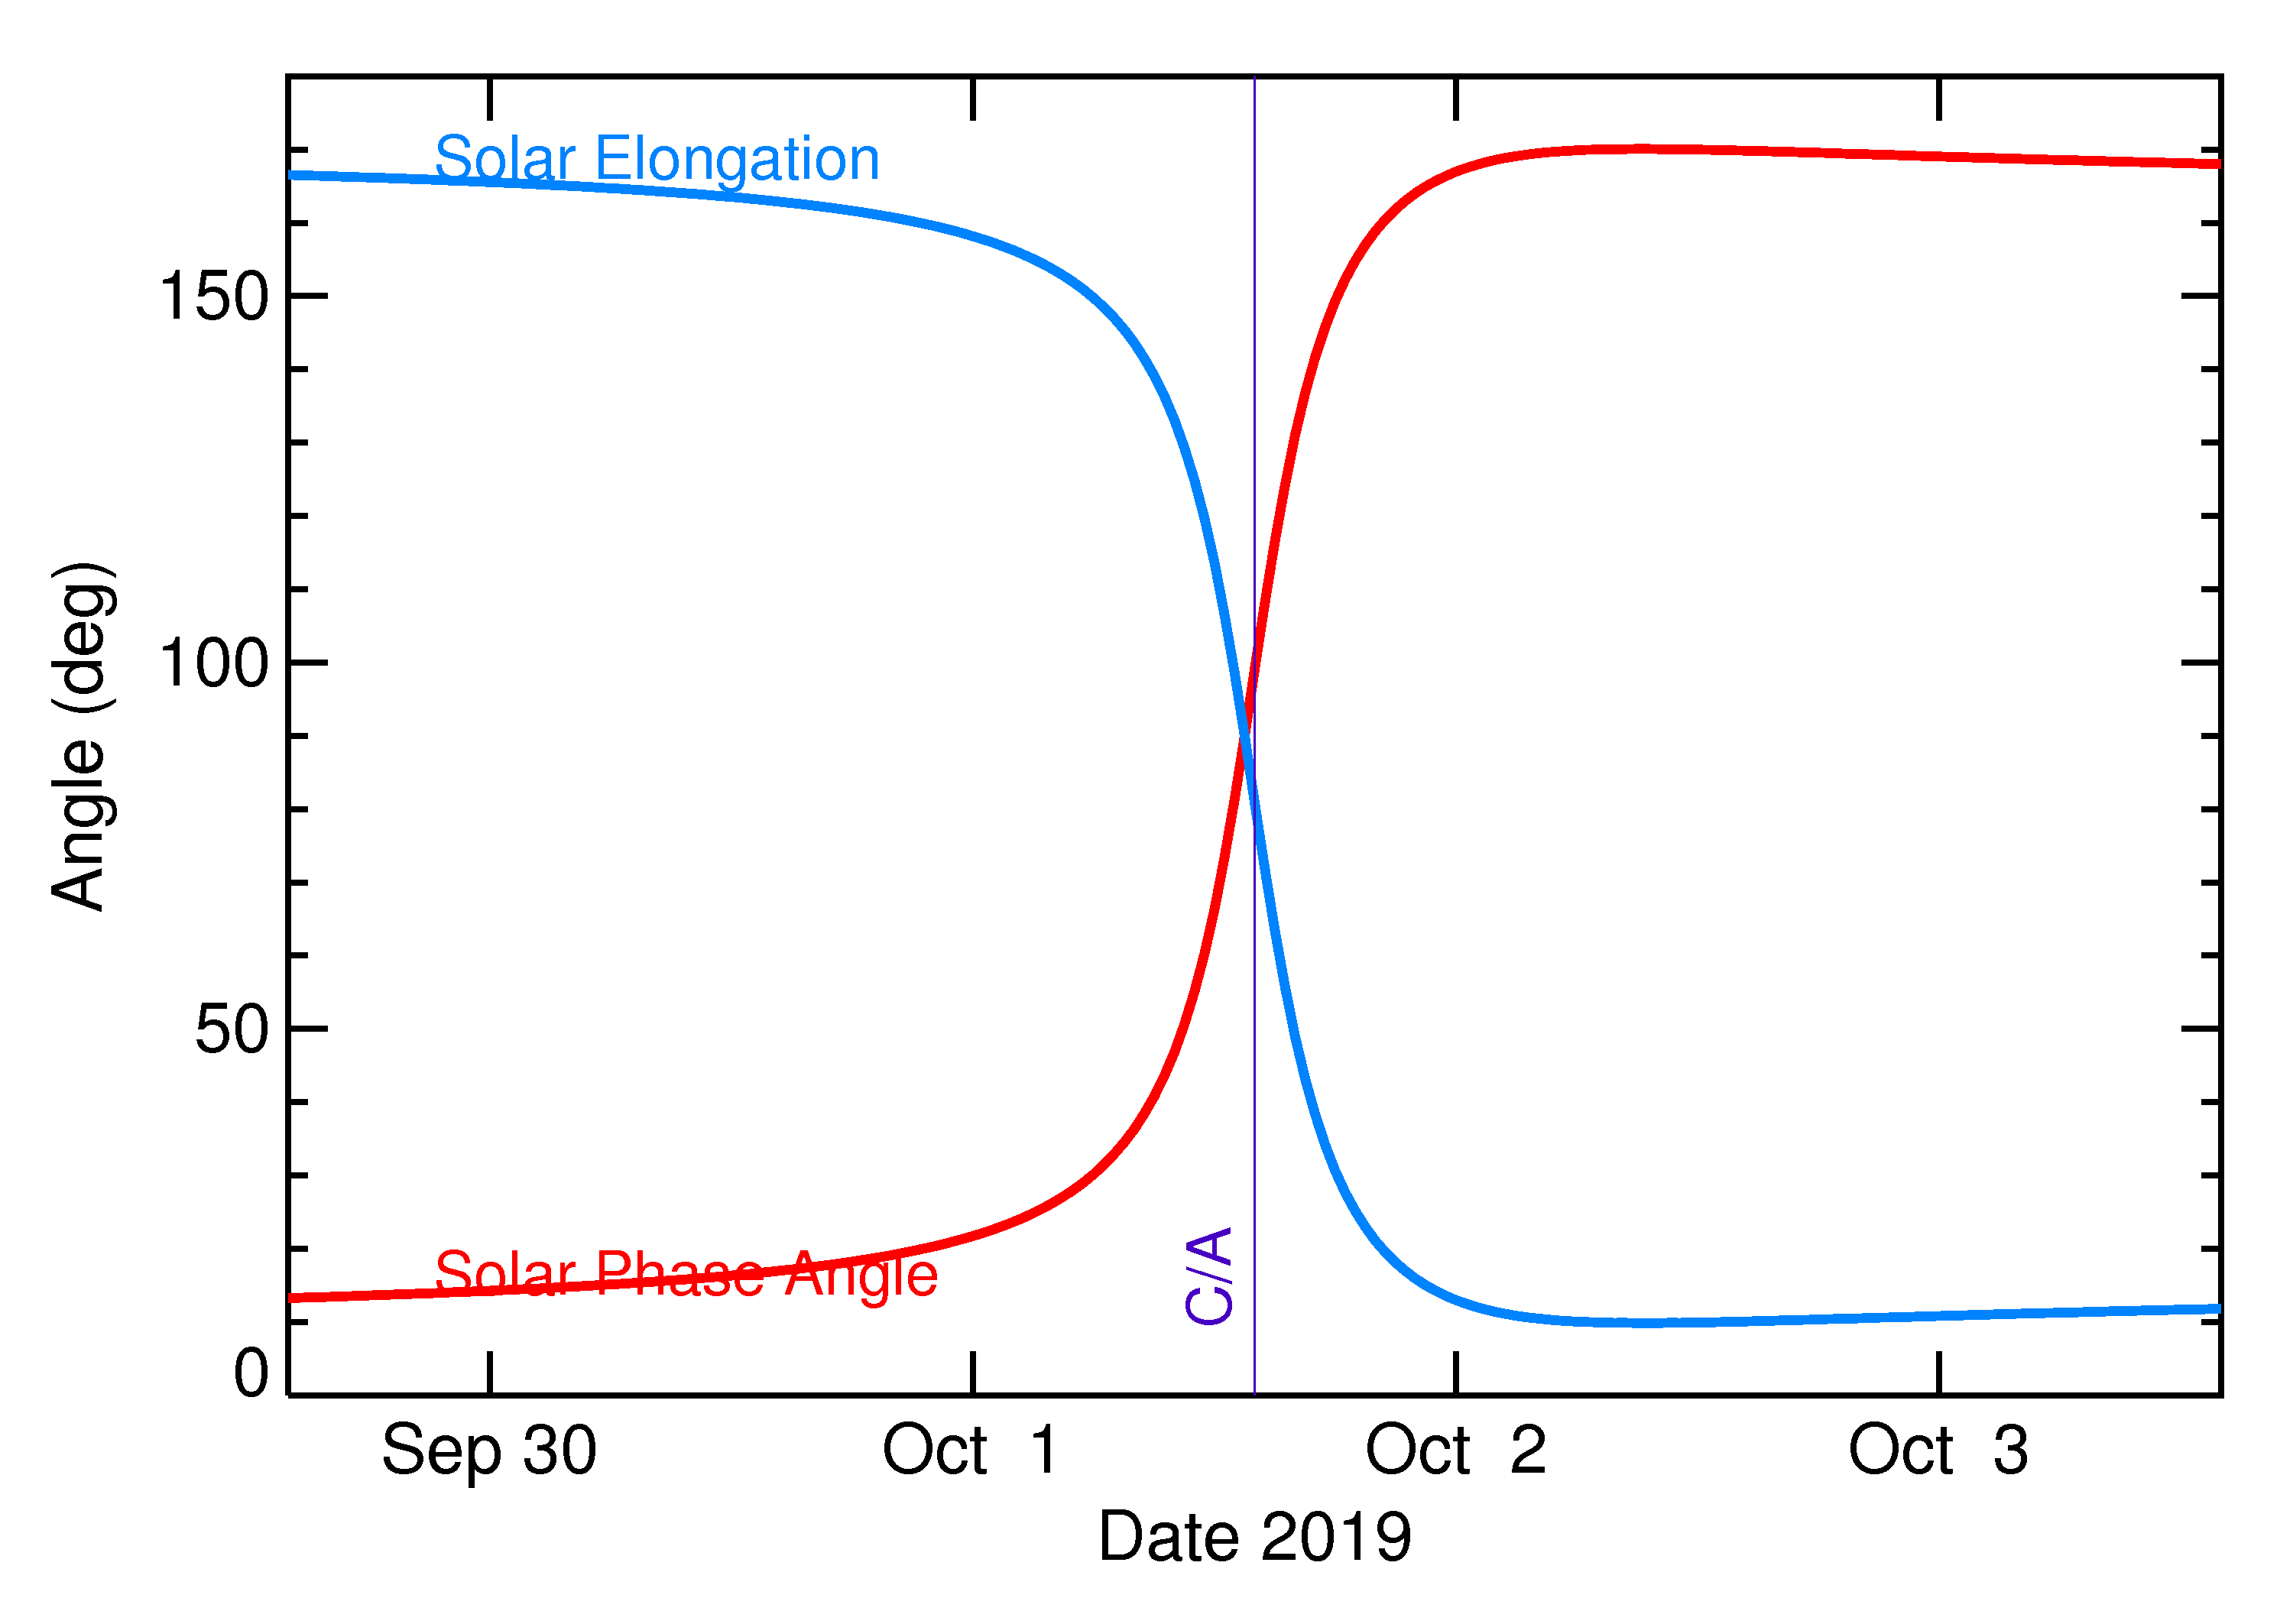 Solar Elongation and Solar Phase Angle of 2019 SM8 in the days around closest approach